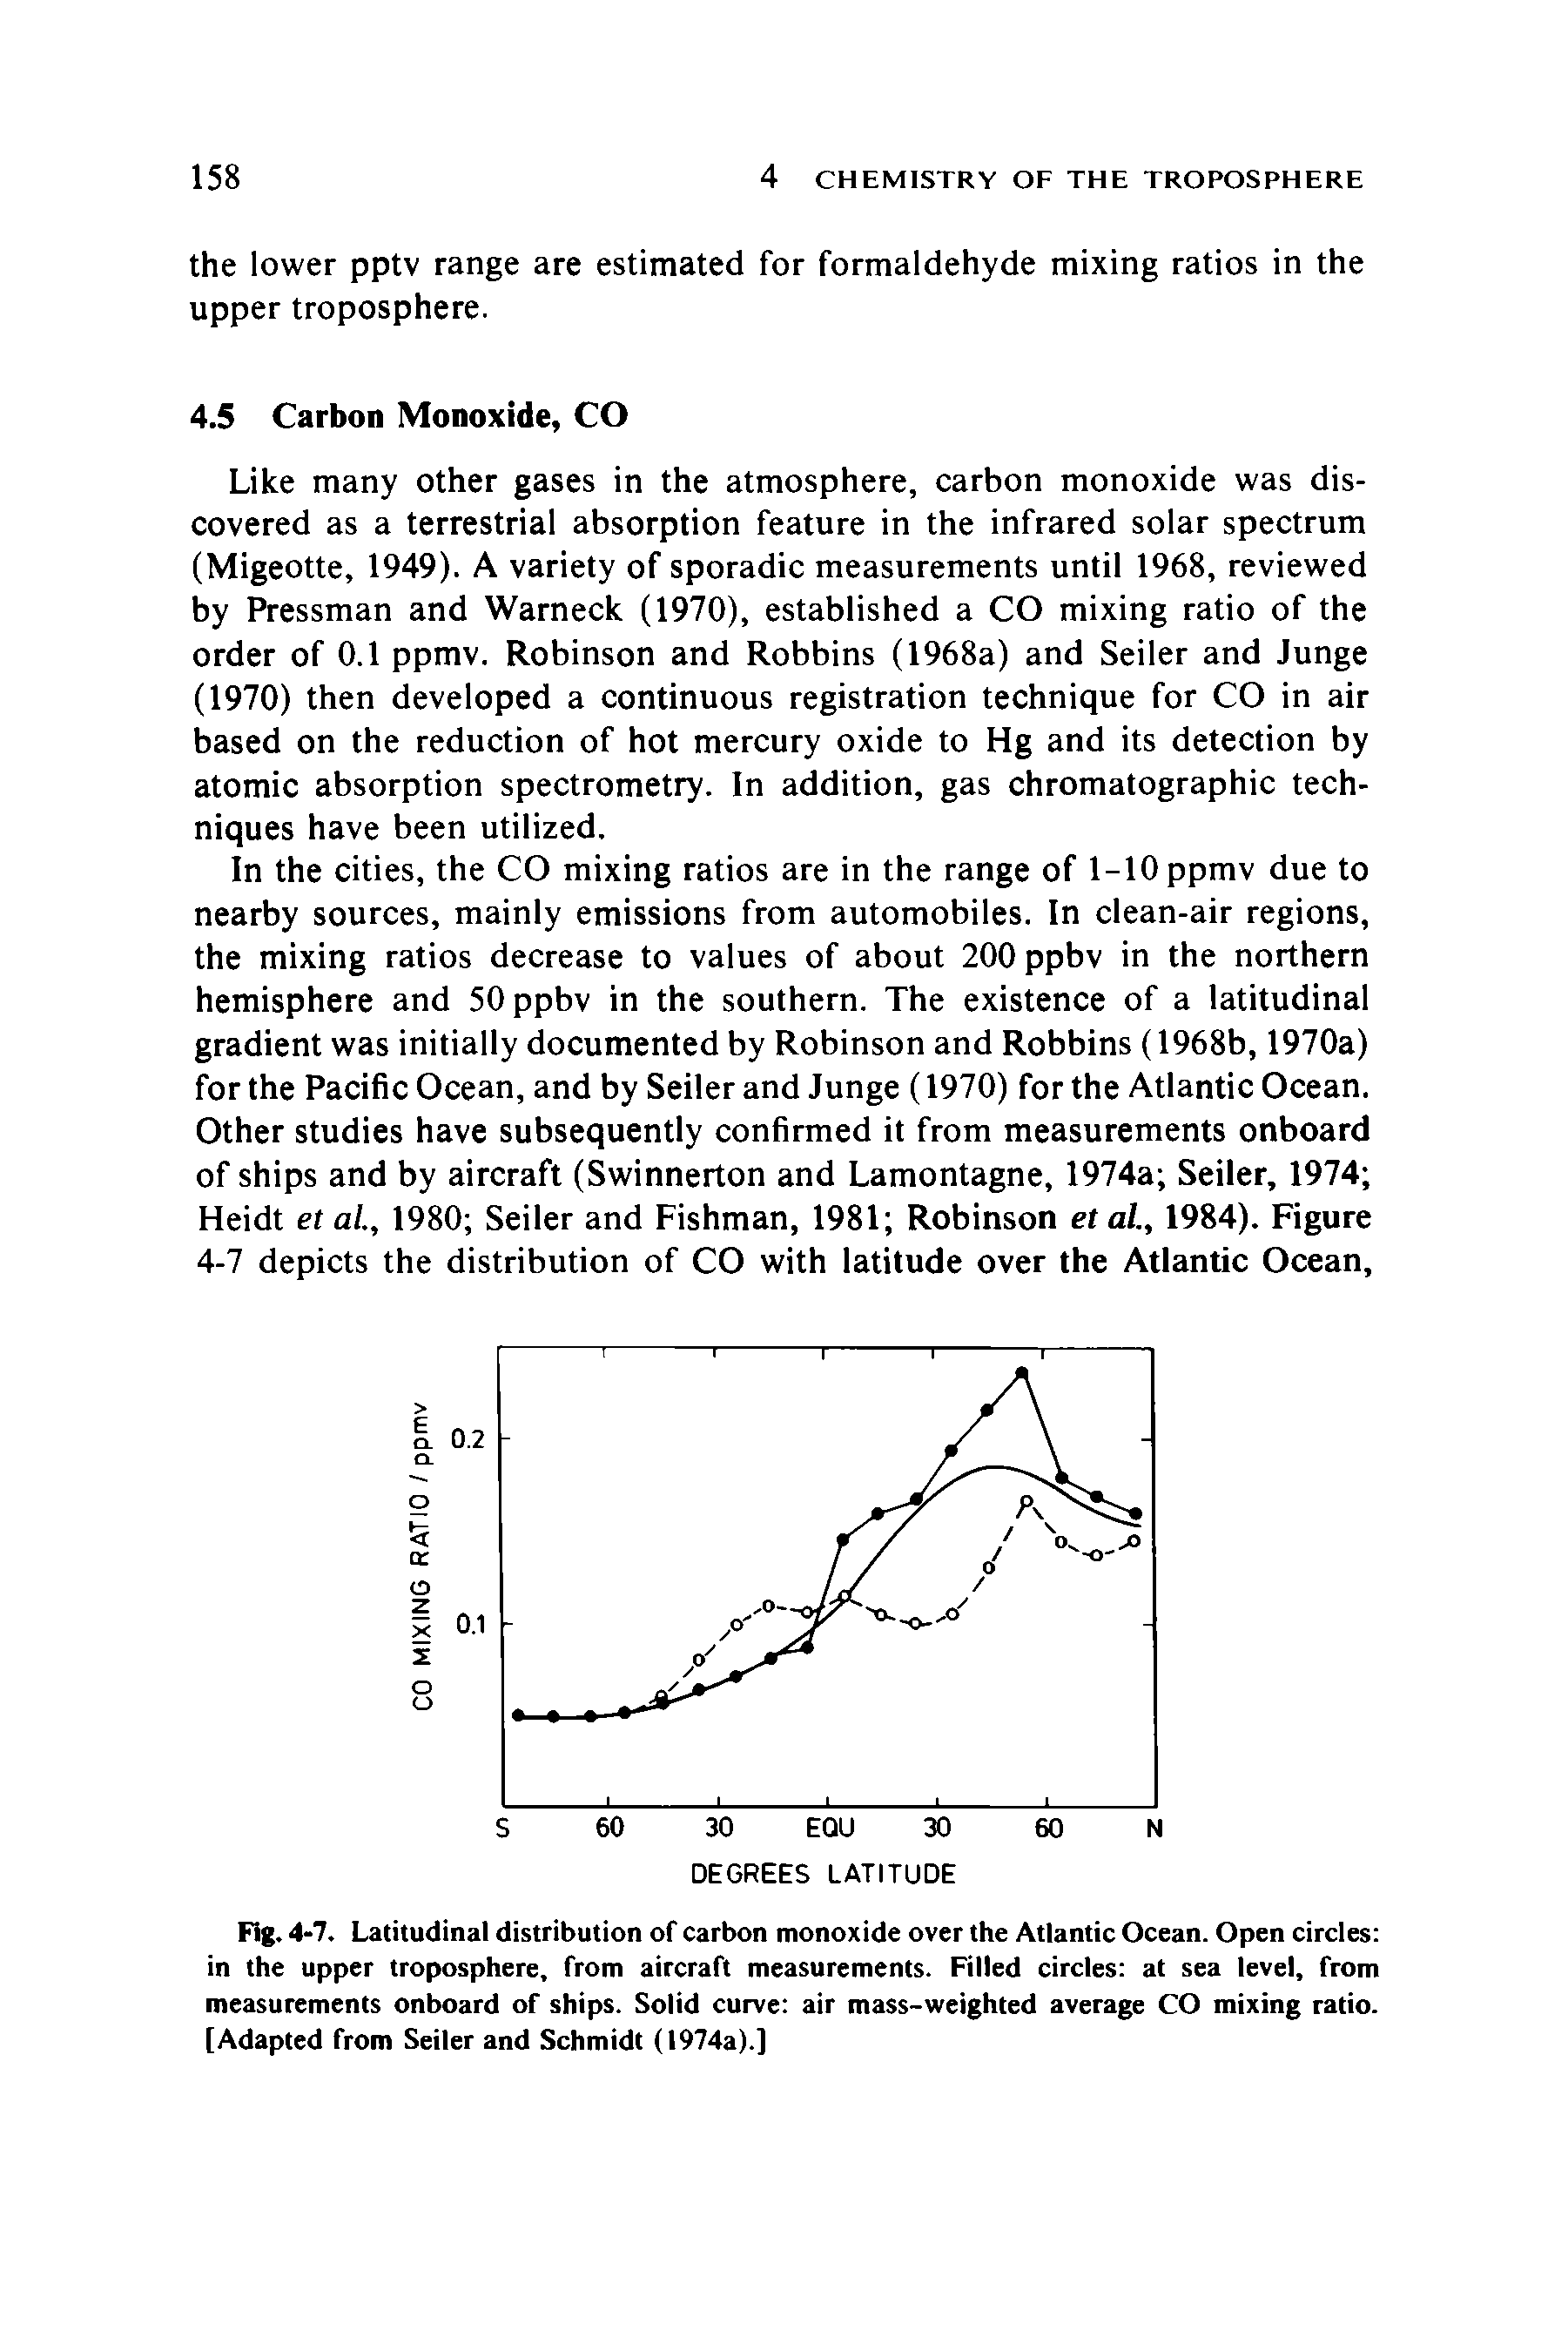 Fig. 4-7. Latitudinal distribution of carbon monoxide over the Atlantic Ocean. Open circles in the upper troposphere, from aircraft measurements. Filled circles at sea level, from measurements onboard of ships. Solid curve air mass-weighted average CO mixing ratio. [Adapted from Seiler and Schmidt (1974a).]...